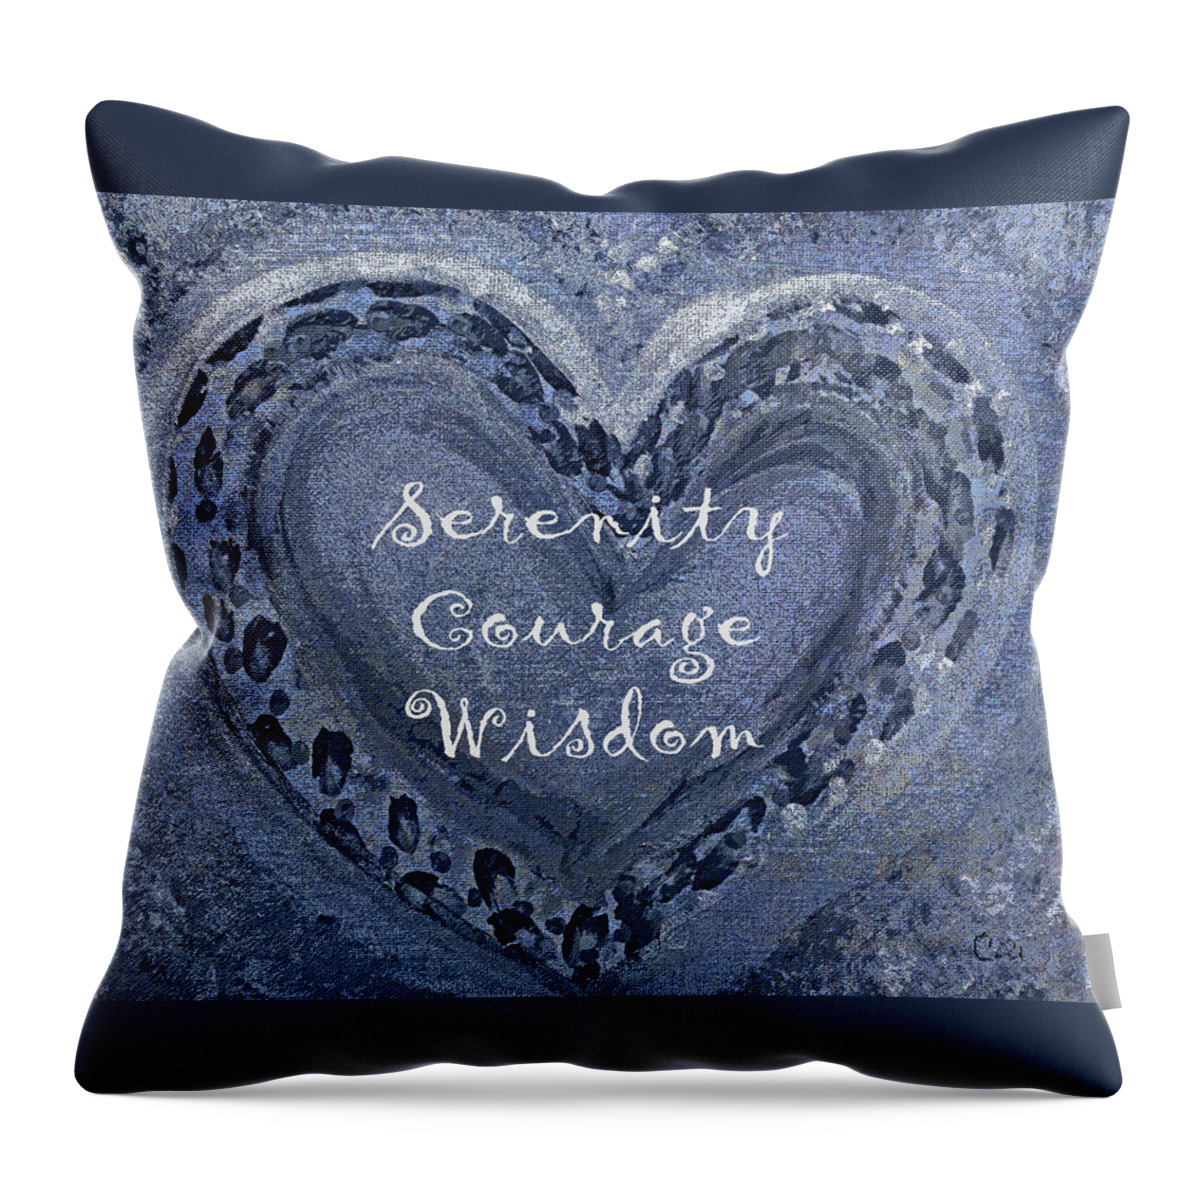 Serenity Throw Pillow featuring the painting Serenity Courage Wisdom 413 by Corinne Carroll